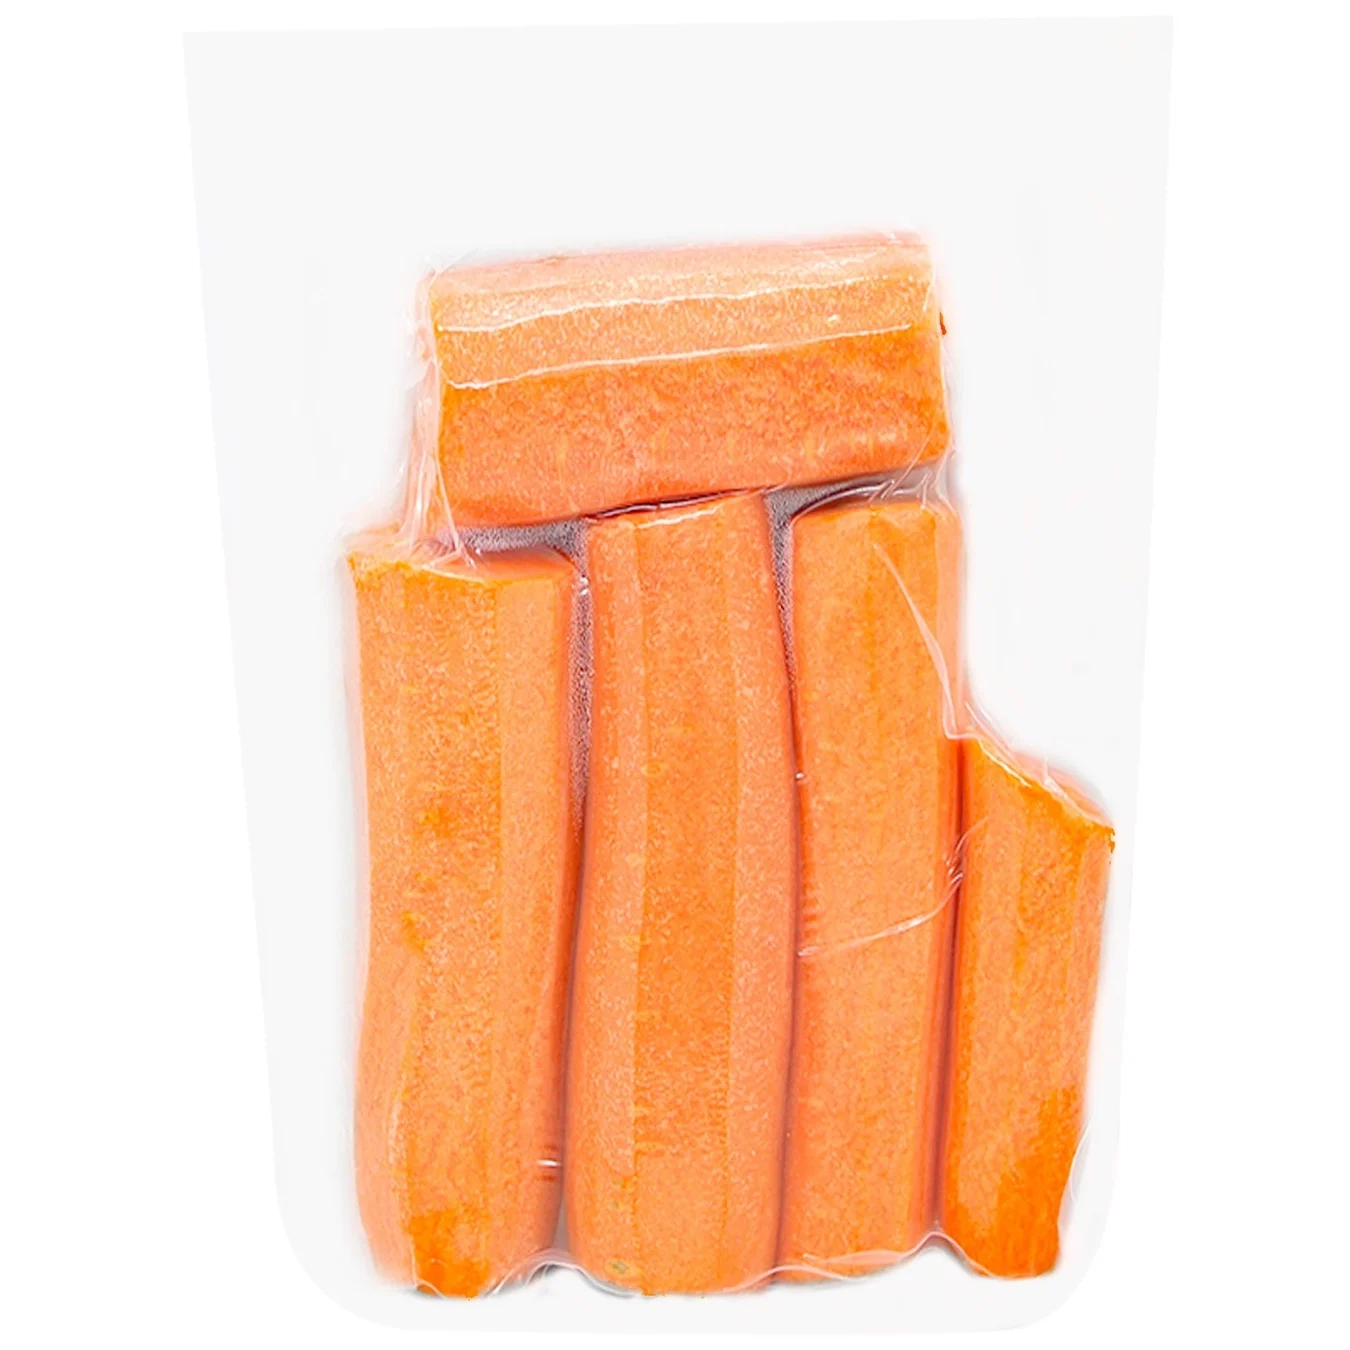 Carrots whole peeled and washed 500g